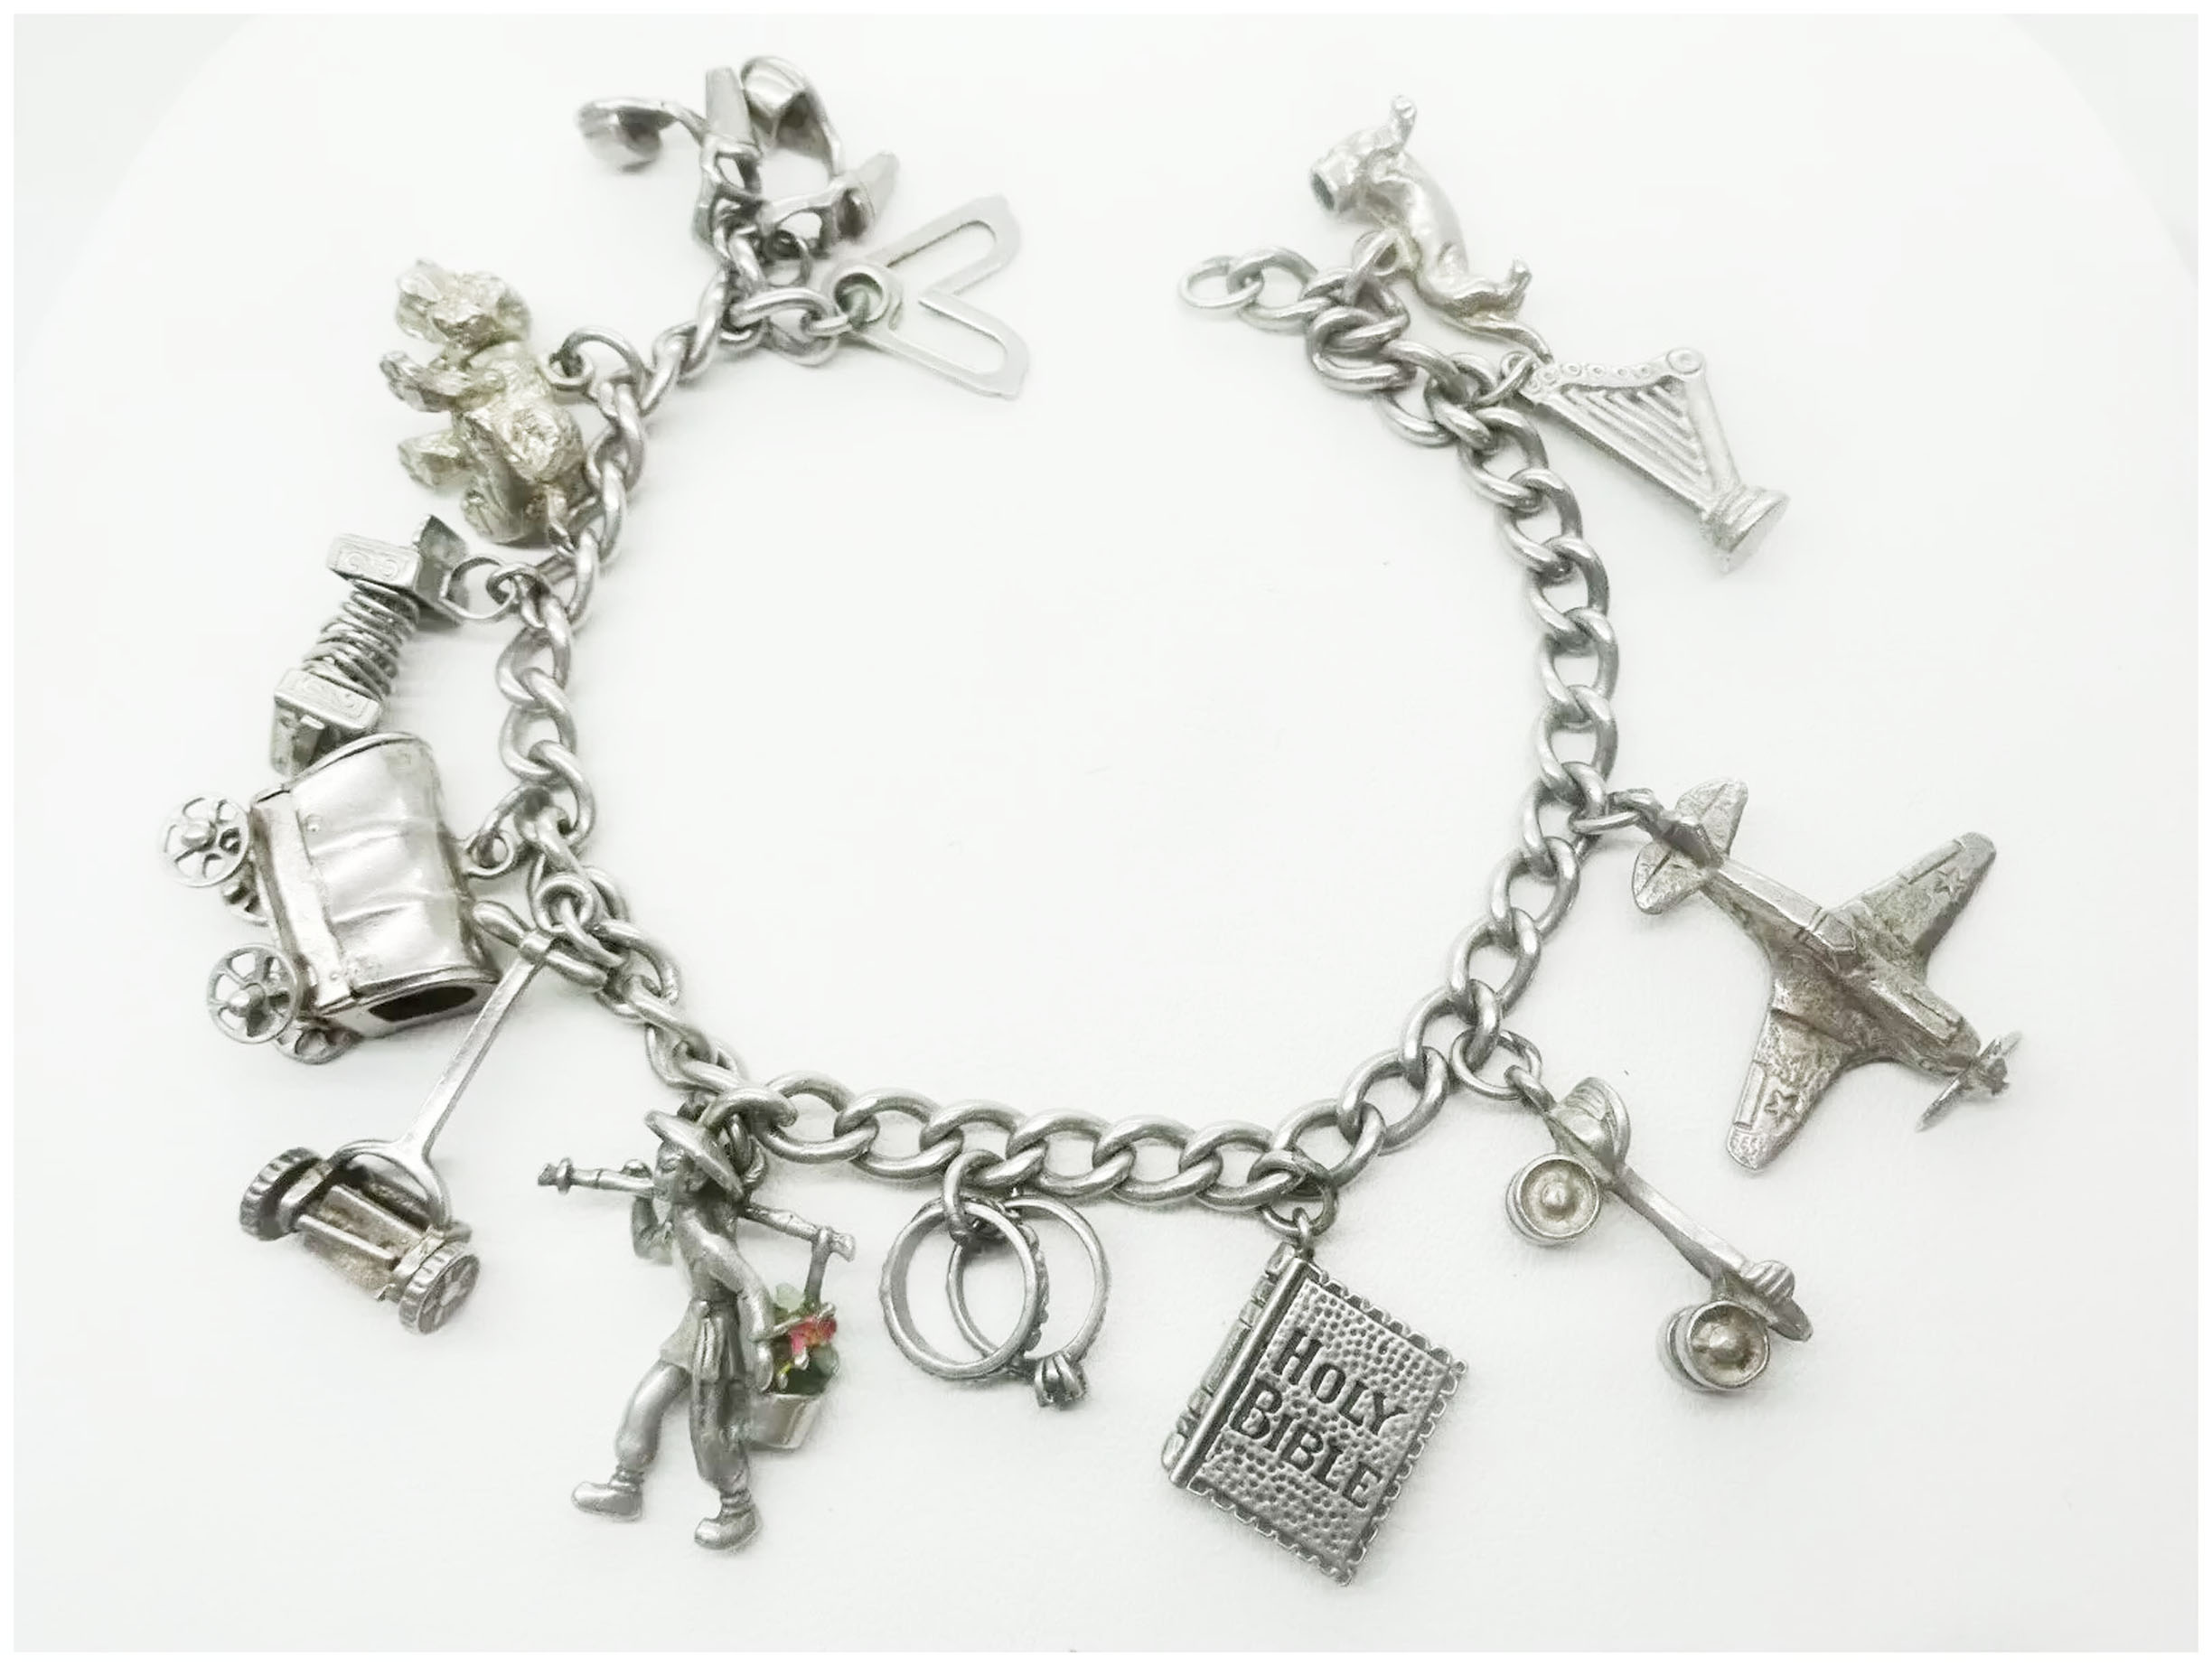 Bedazzled! Charm Bracelets - Blooming Creativity – Make It Real